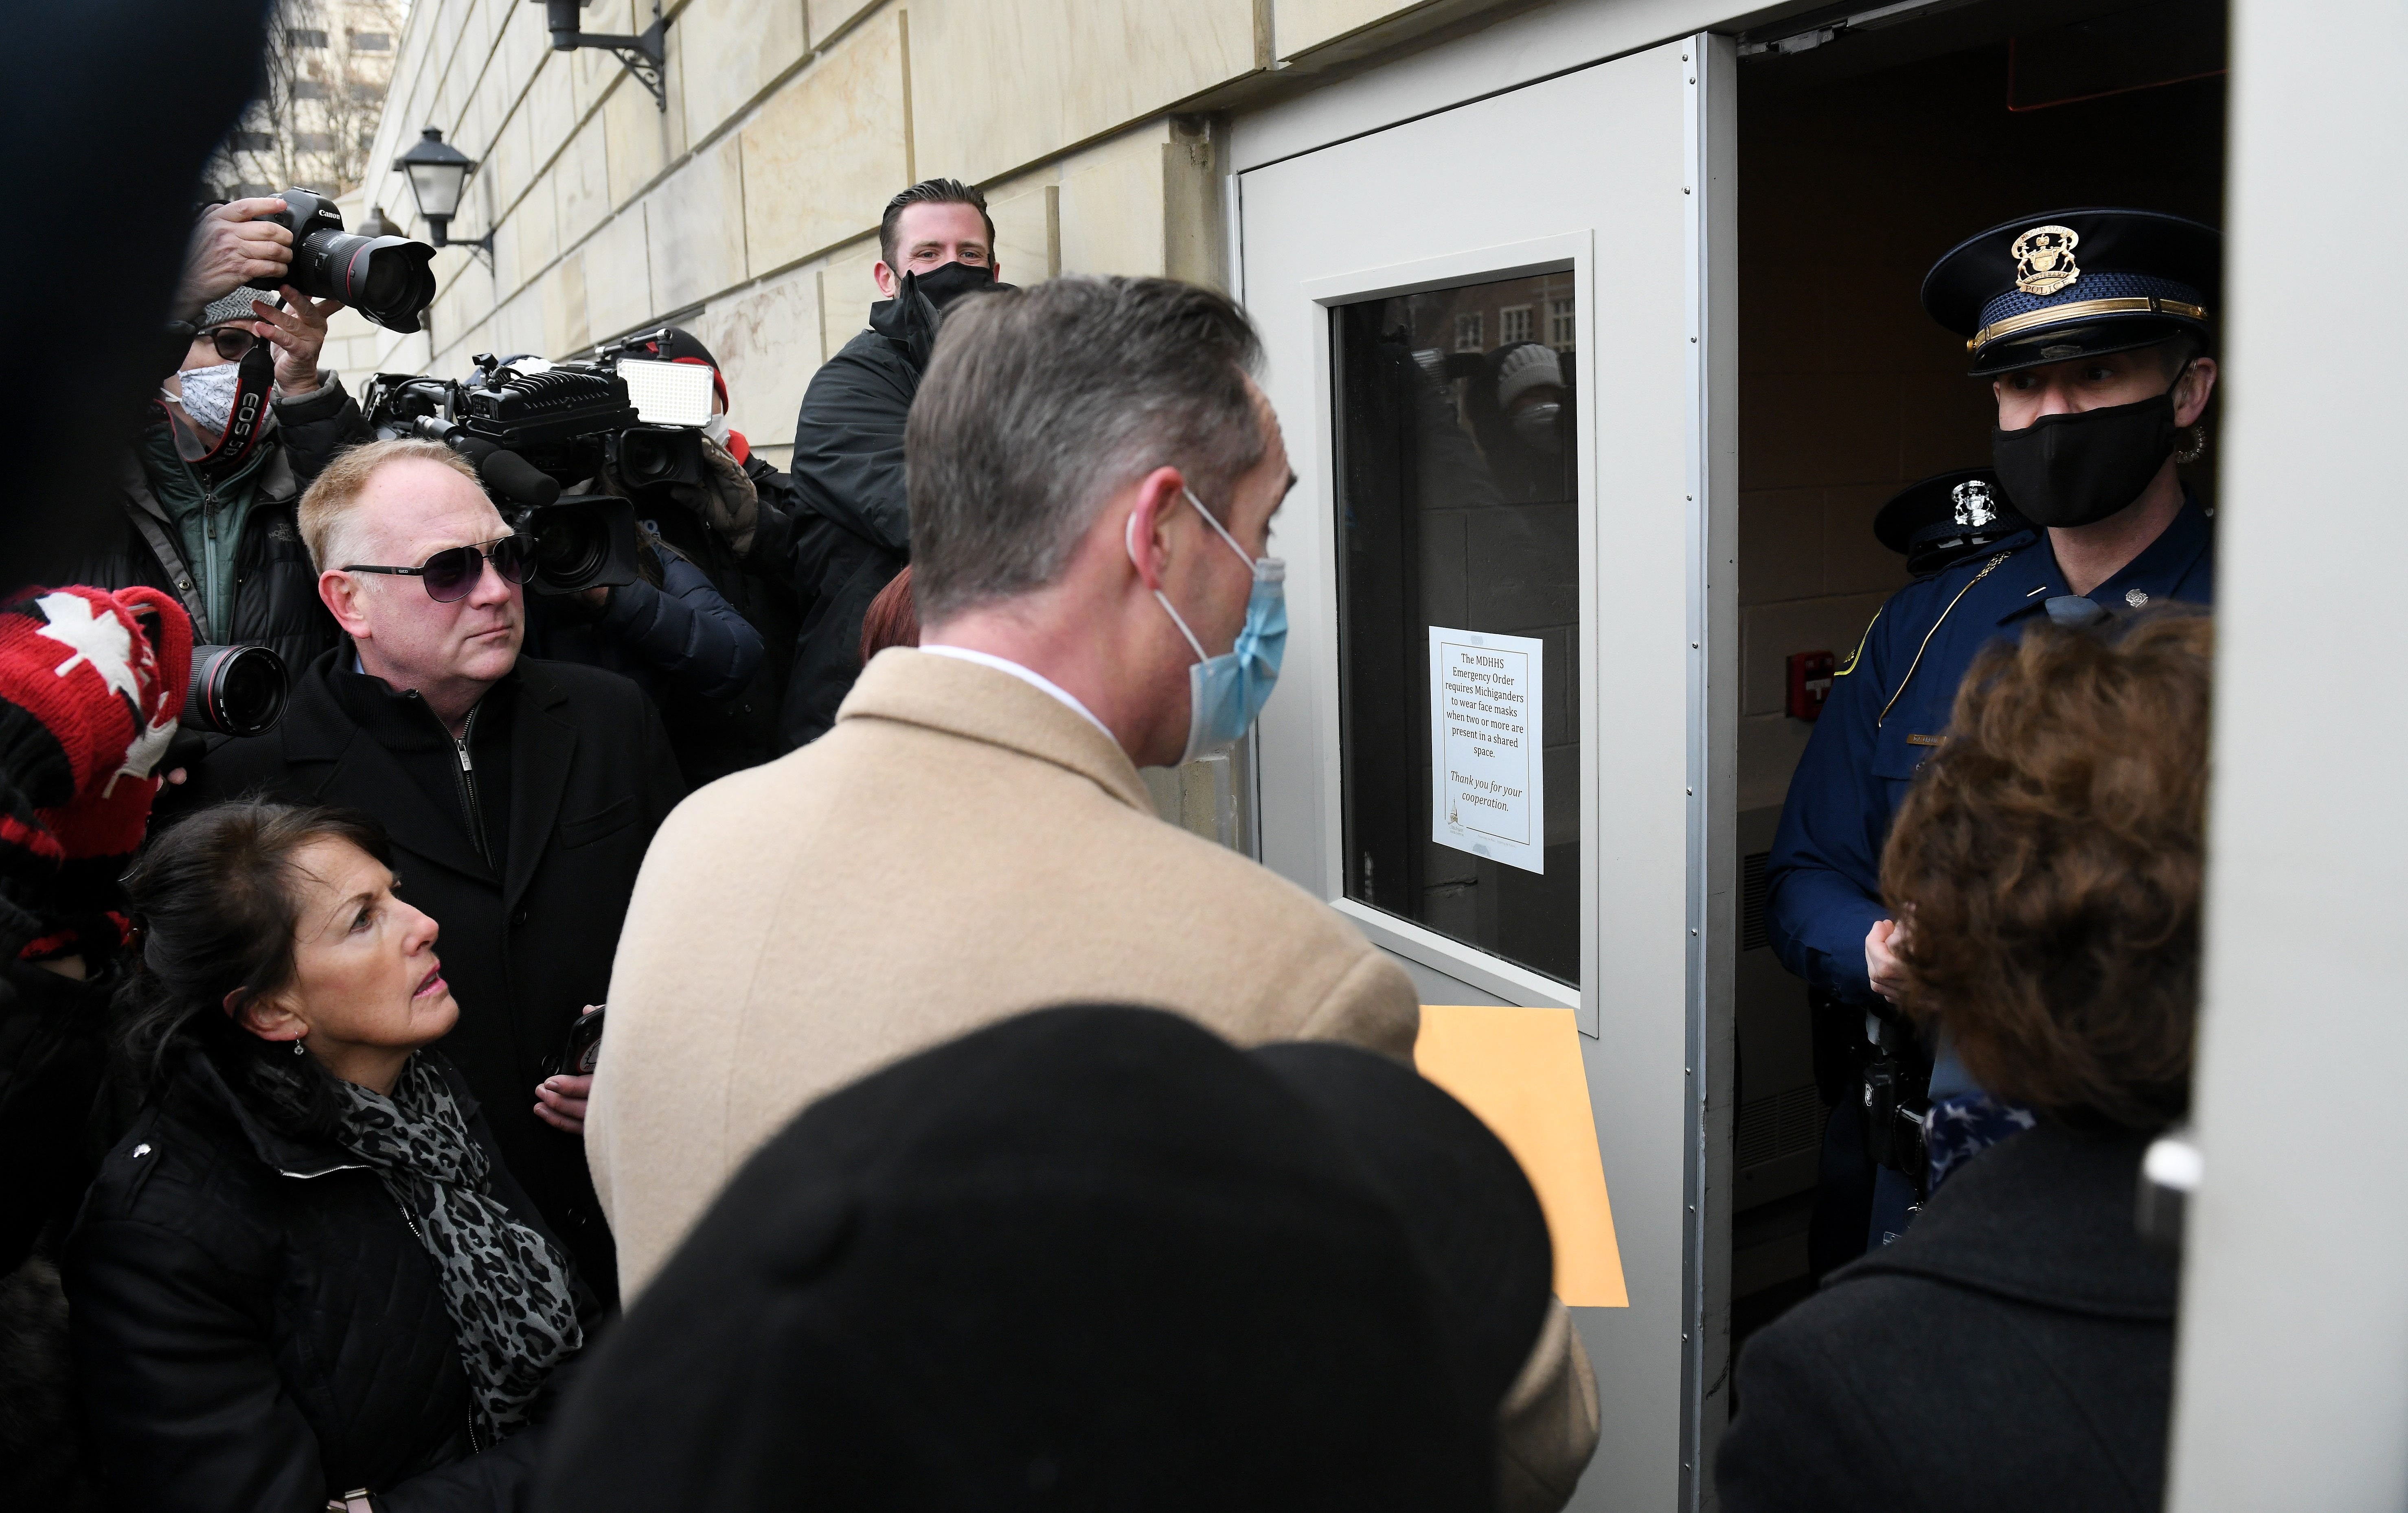 A Michigan State Police officer tells attorney Ian Northon, in tan coat, and Republican electors that they cannot enter the Michigan State Capitol.  At left in sunglasses is state Rep. Matt Maddock.